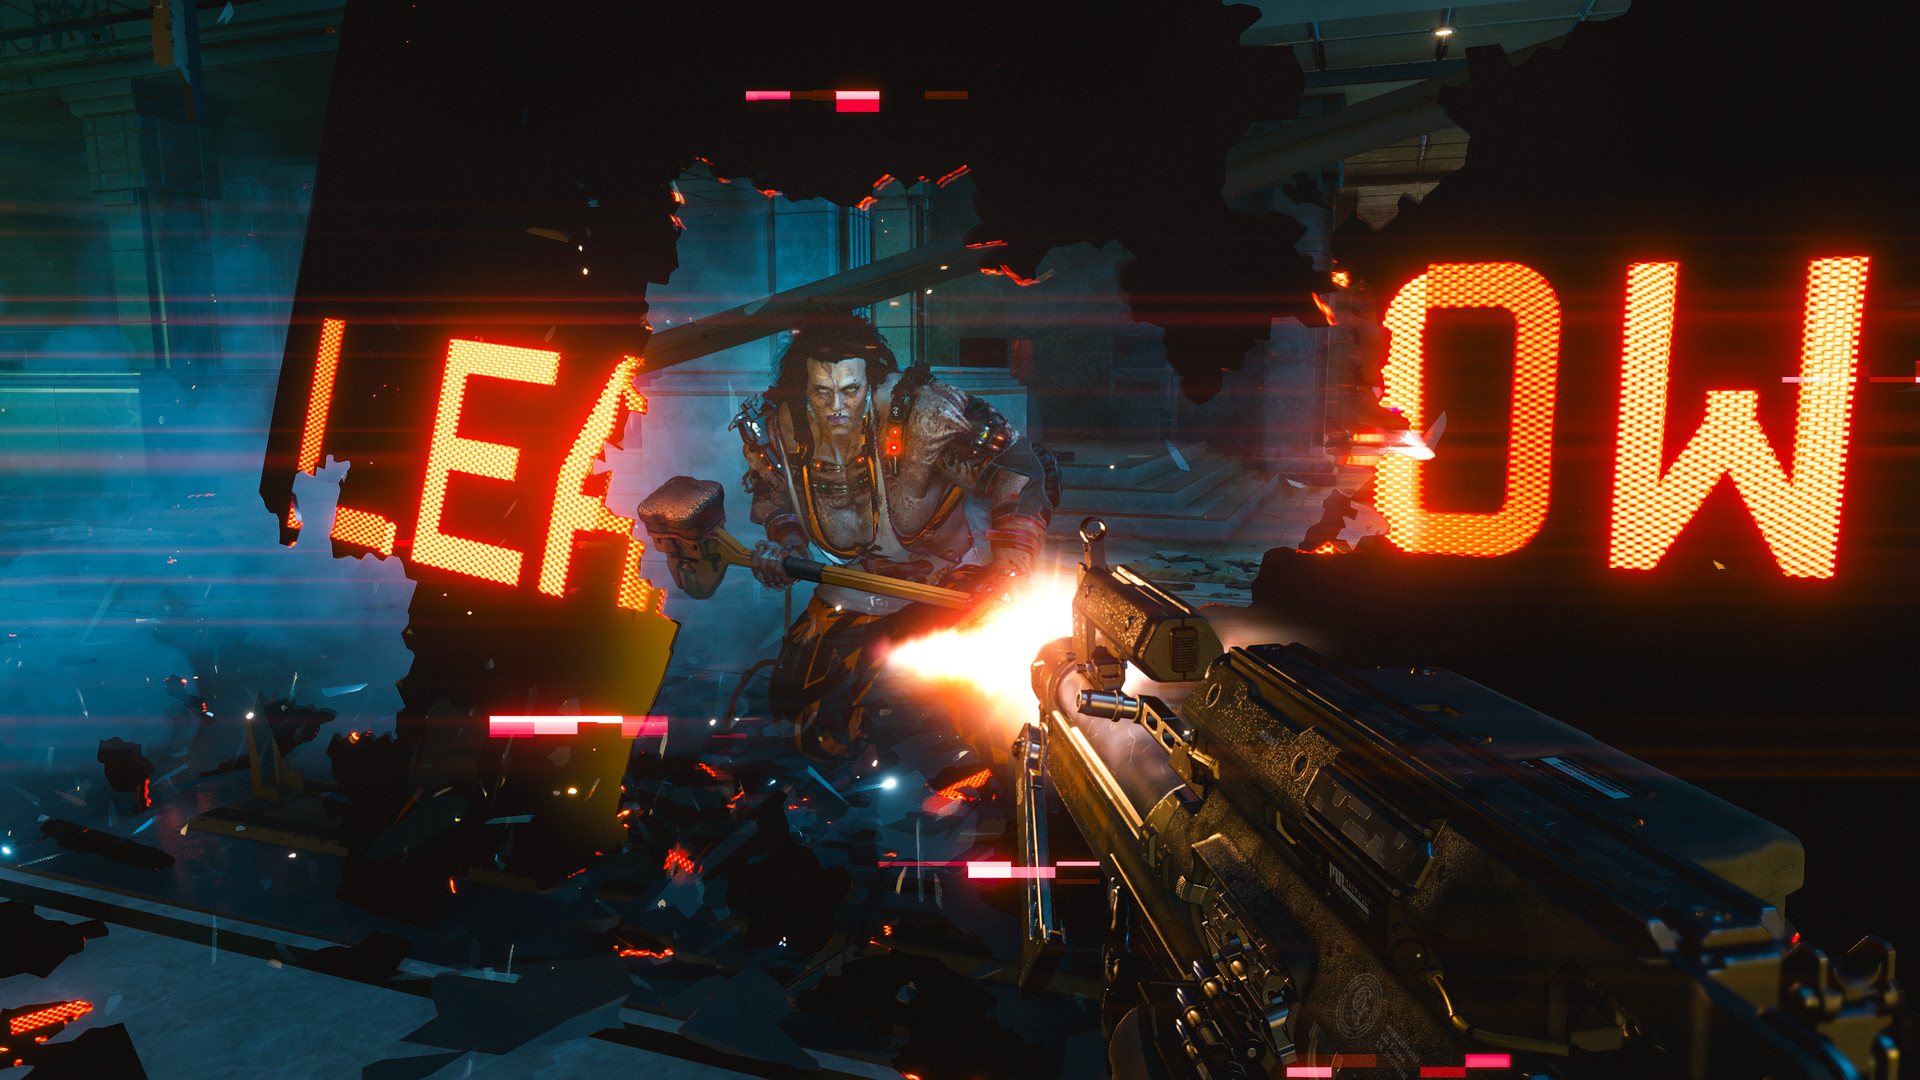 Cyberpunk 2077 Available For Limited $10 Deal On PlayStation 4 – Gameranx